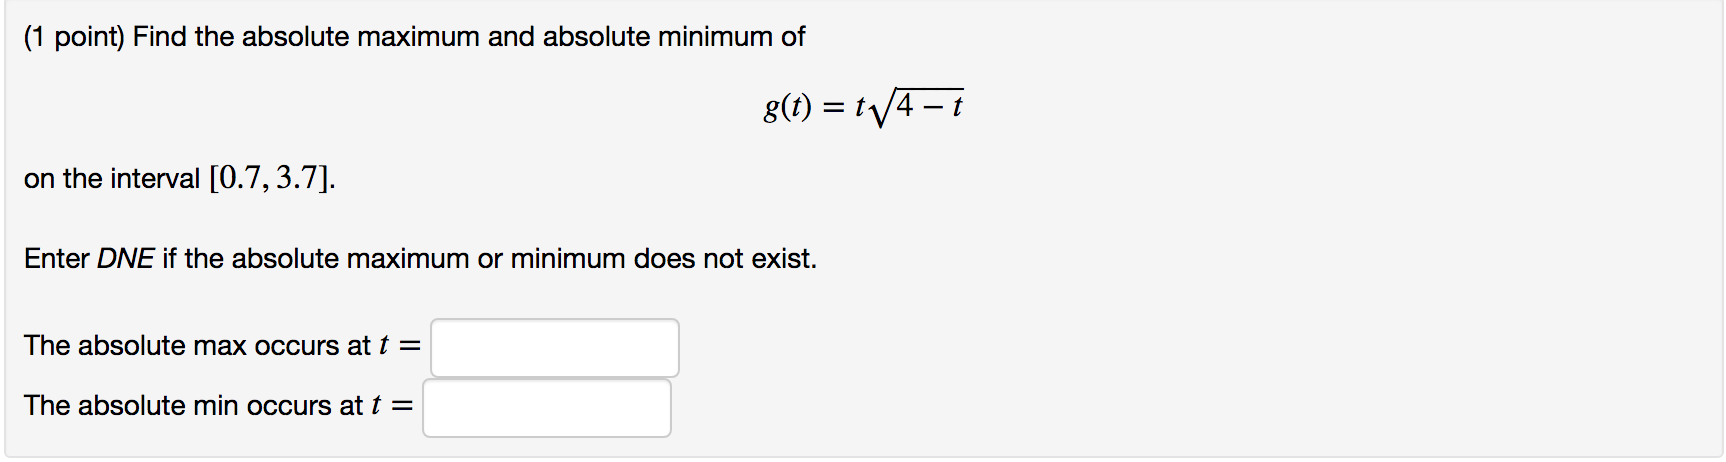 (1 point) Find the absolute maximum and absolute minimum of
g() t4-i
on the interval [0.7,3.7]
Enter DNE if the absolute maximum or minimum does not exist.
The absolute max occurs at t =
The absolute min occurs at t =
